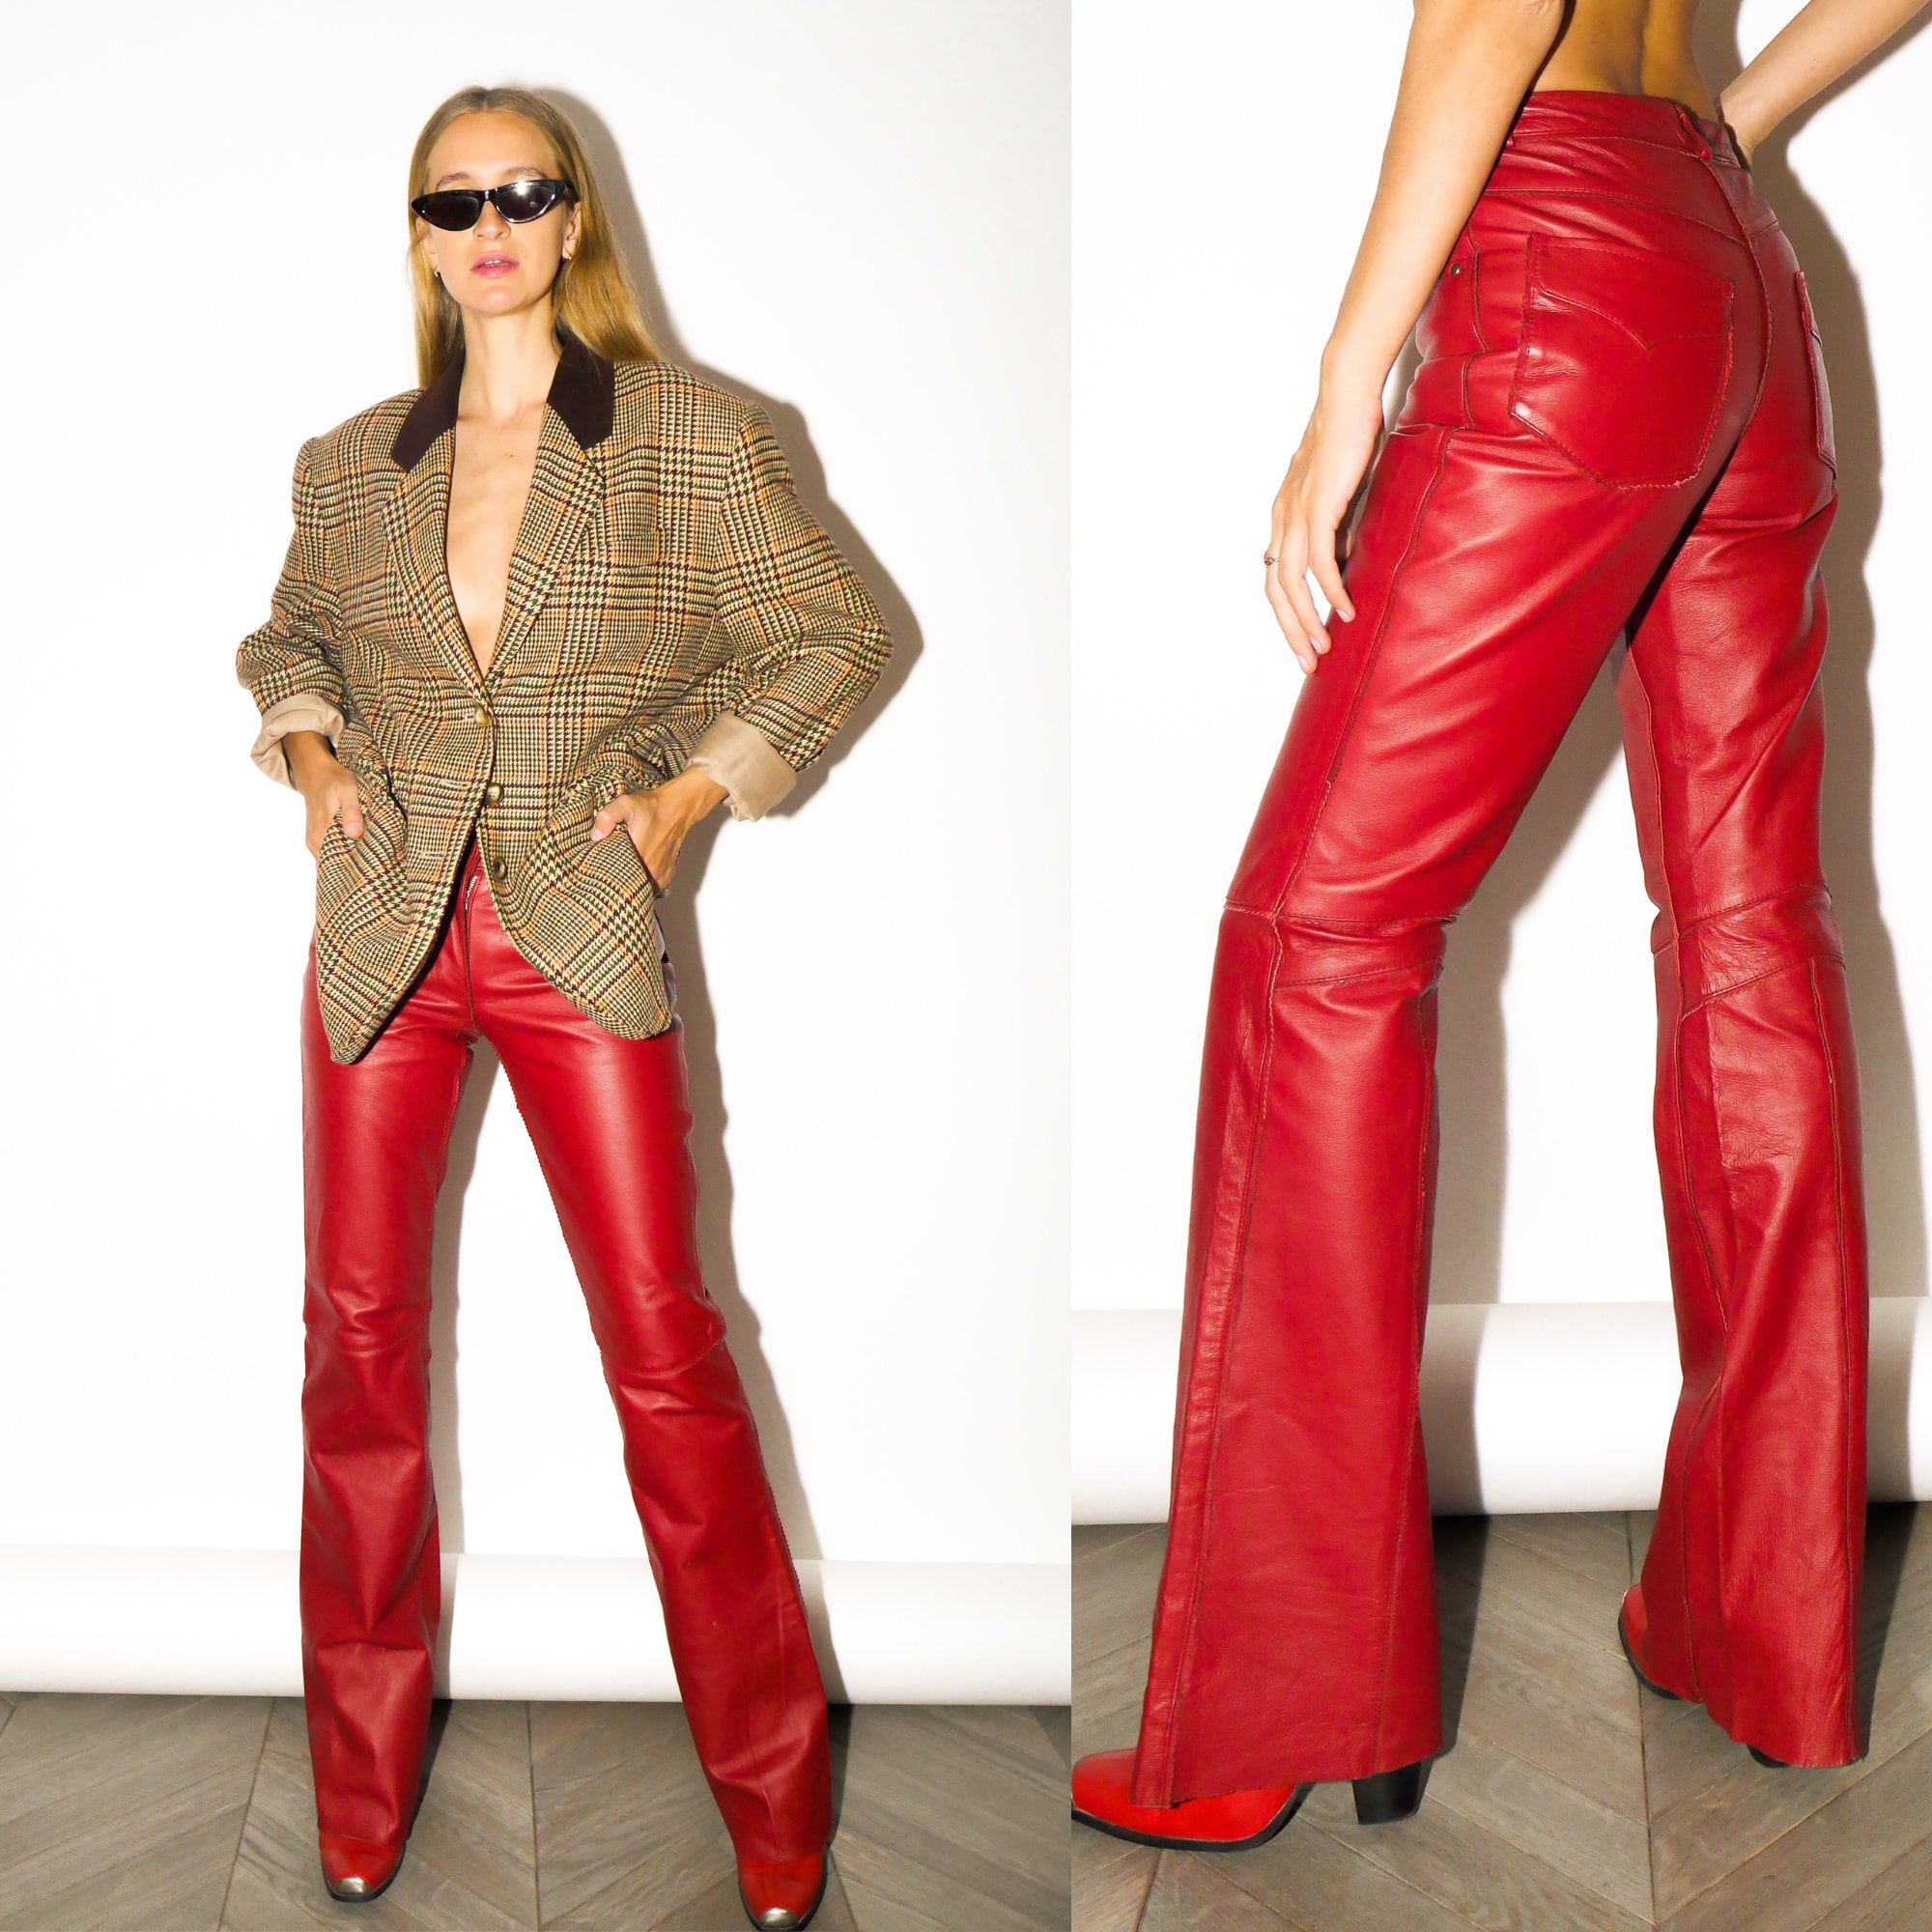 Buy Genuine Cow Skin Red Leather Pants Handmade Real Leather Online in  India  Etsy